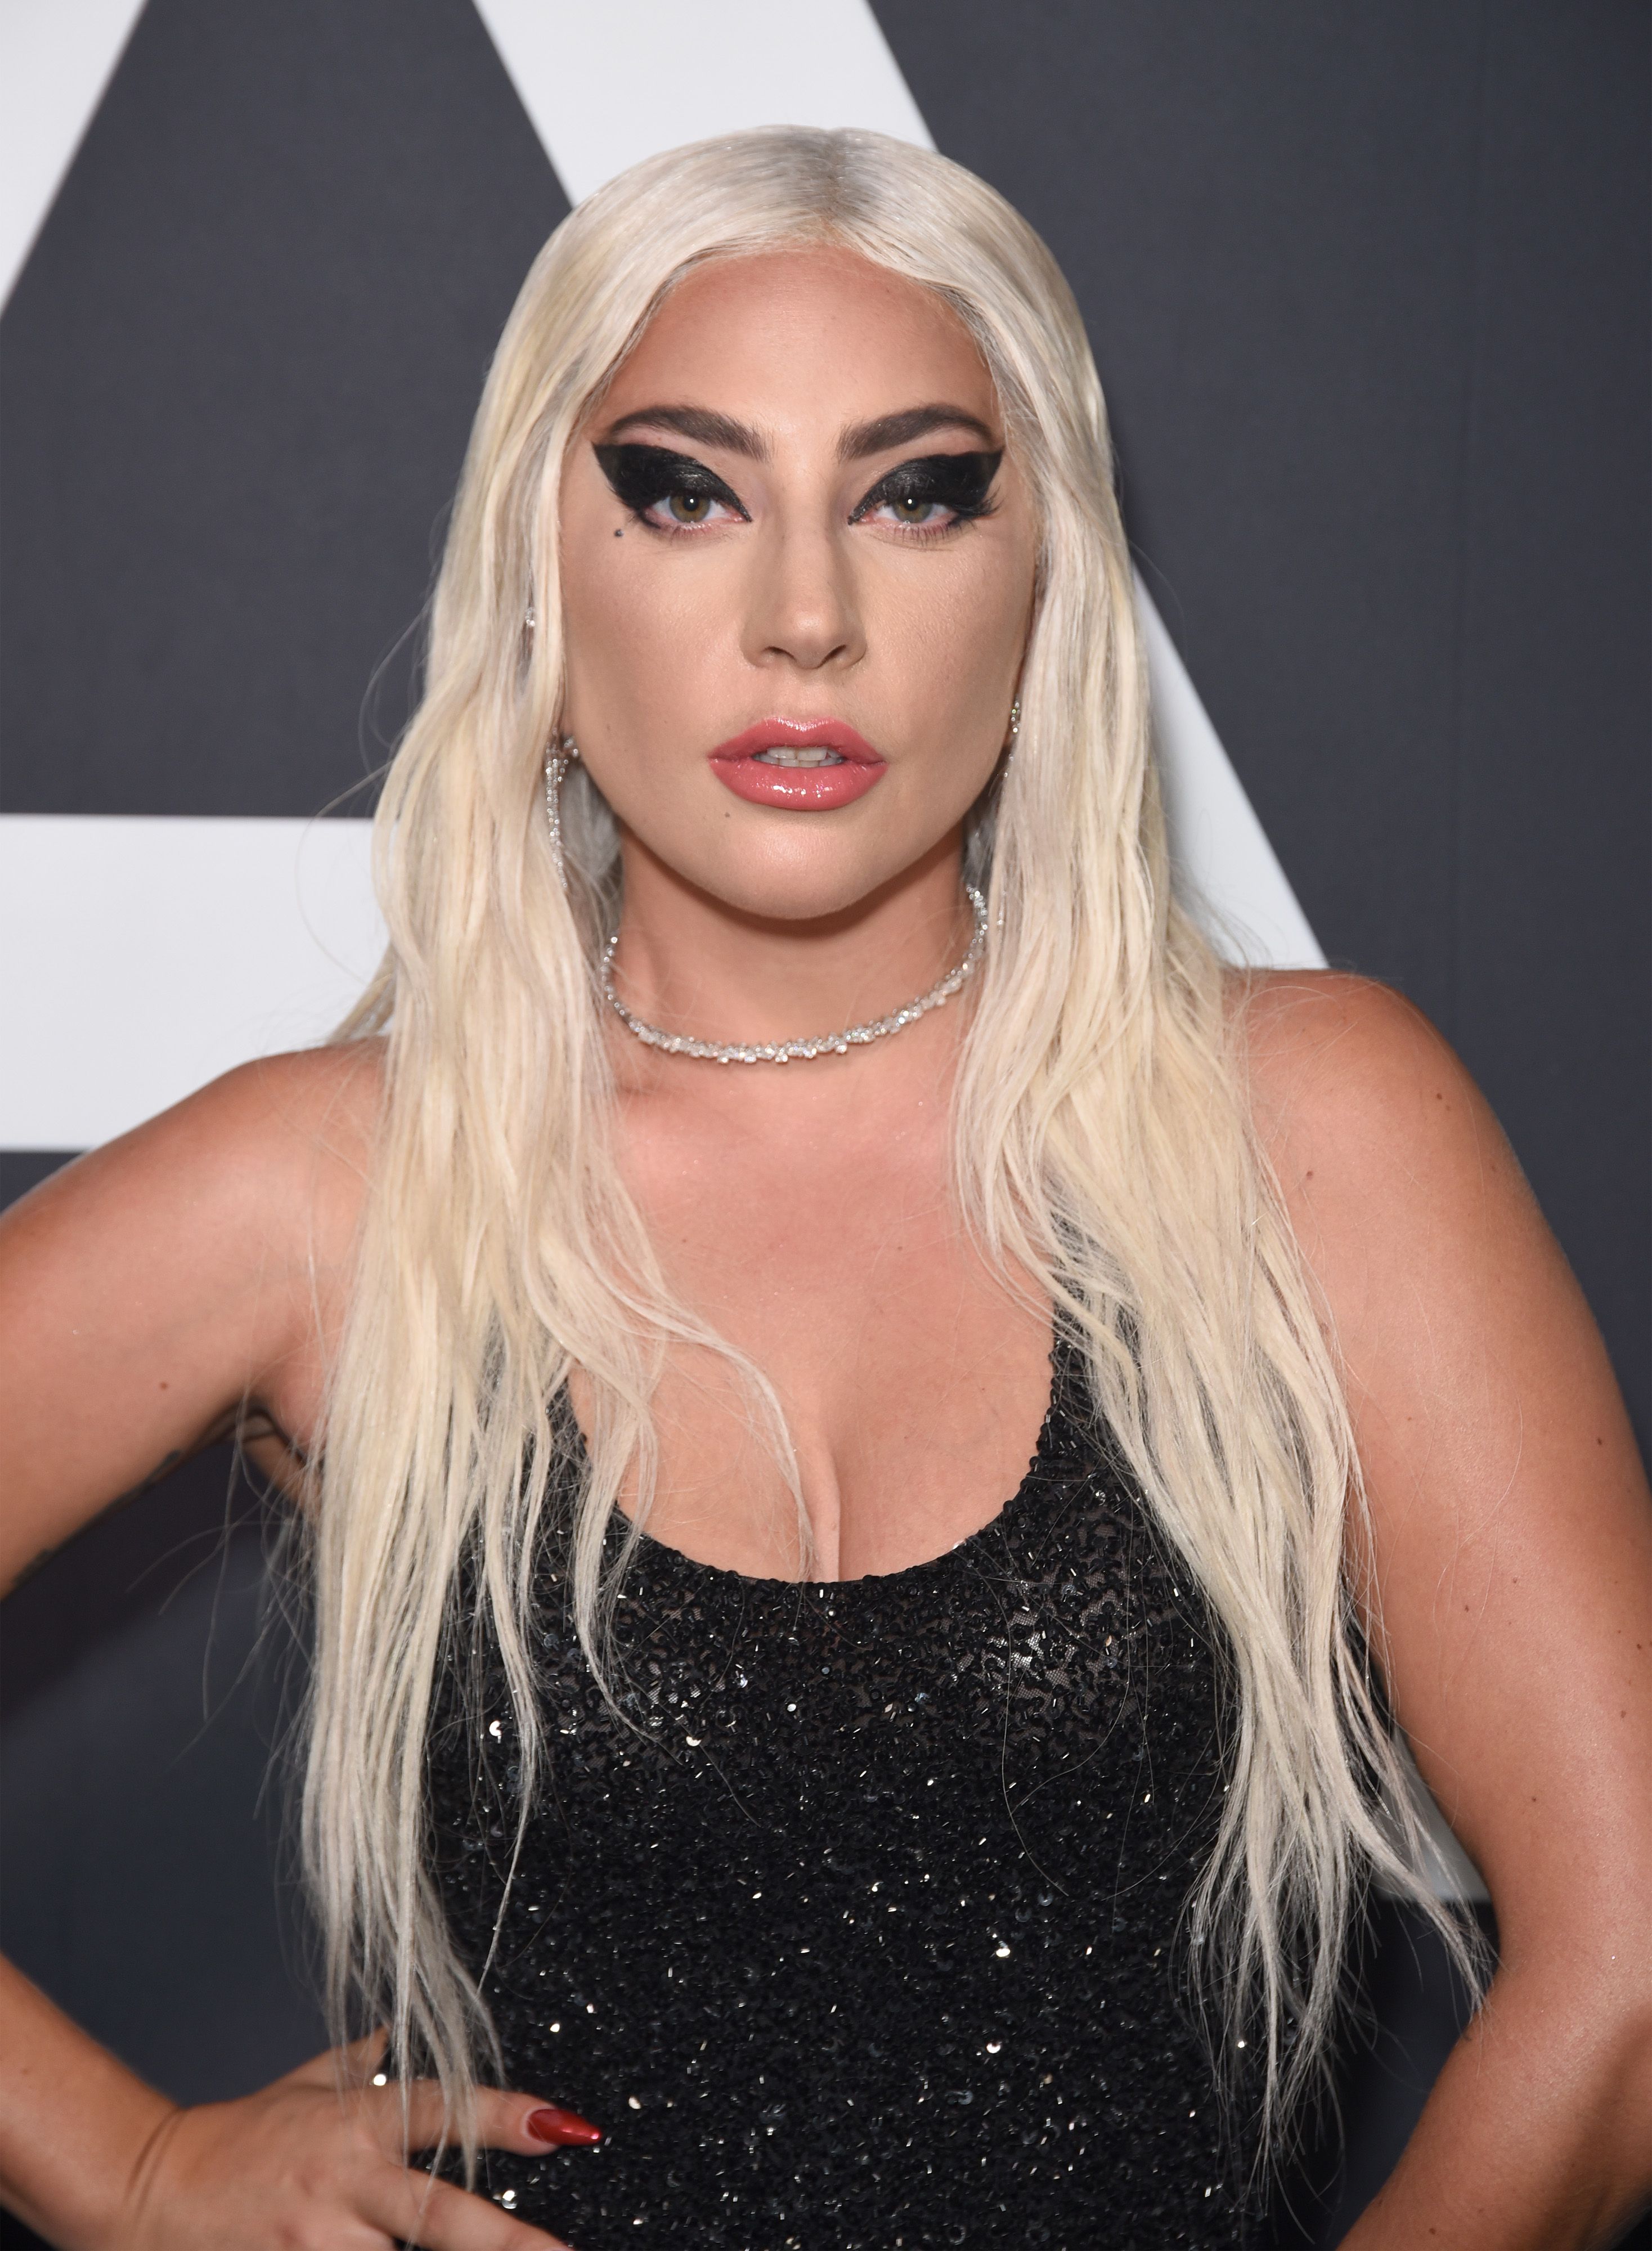 https://hips.hearstapps.com/hmg-prod/images/lady-gaga-attends-lady-gaga-celebrates-the-launch-of-haus-news-photo-1577928847.jpg